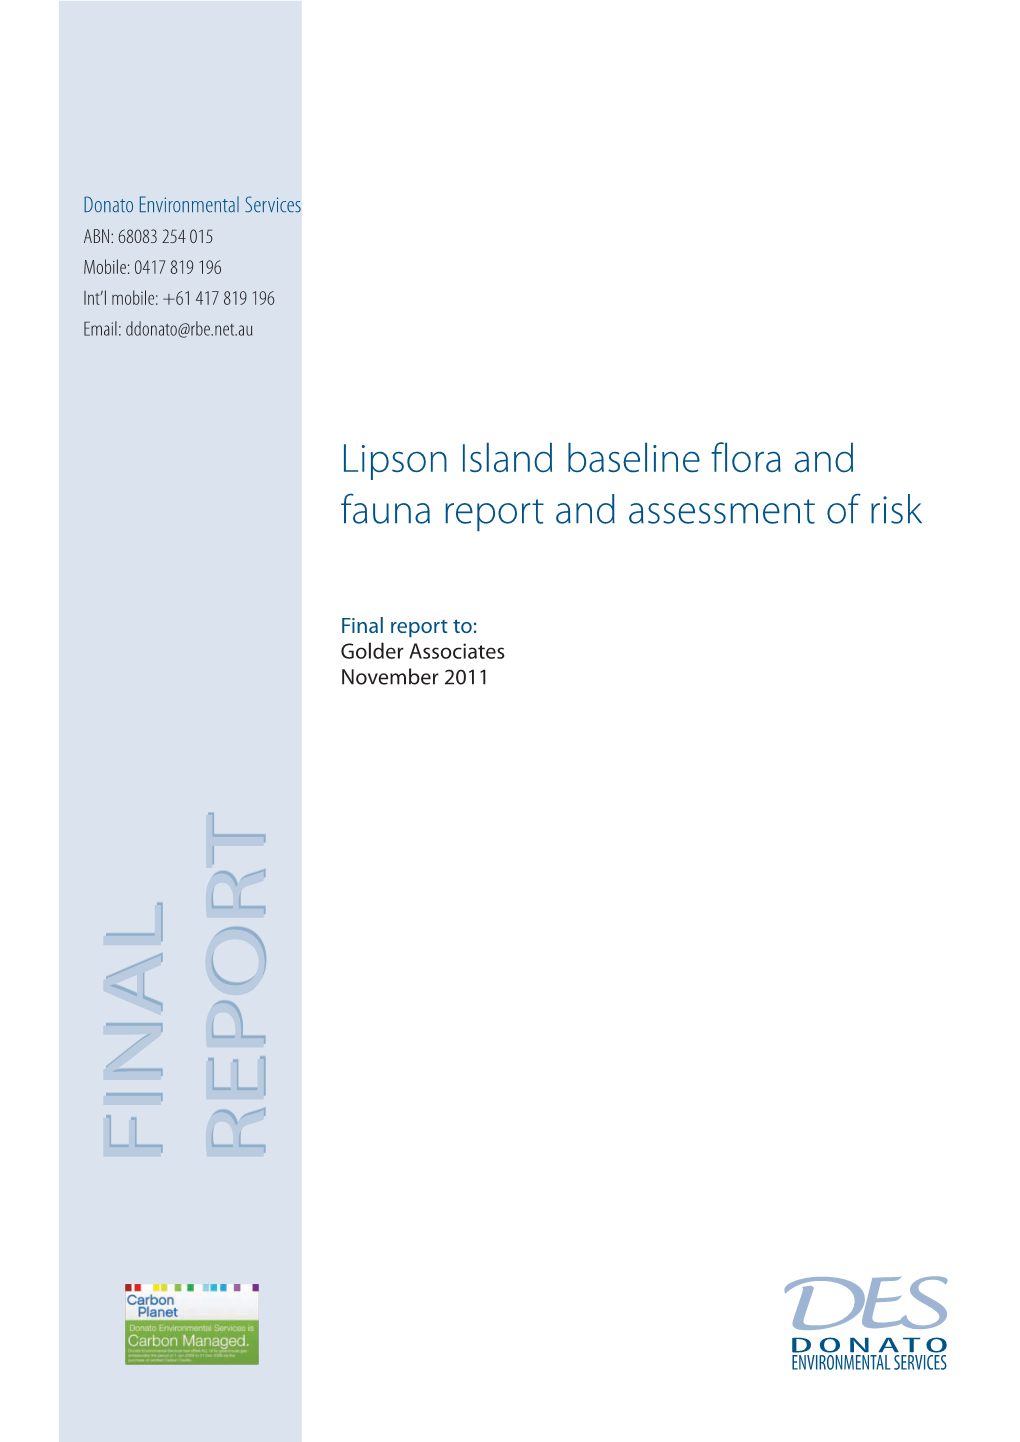 Lipson Island Baseline Flora and Fauna Report and Assessment of Risk